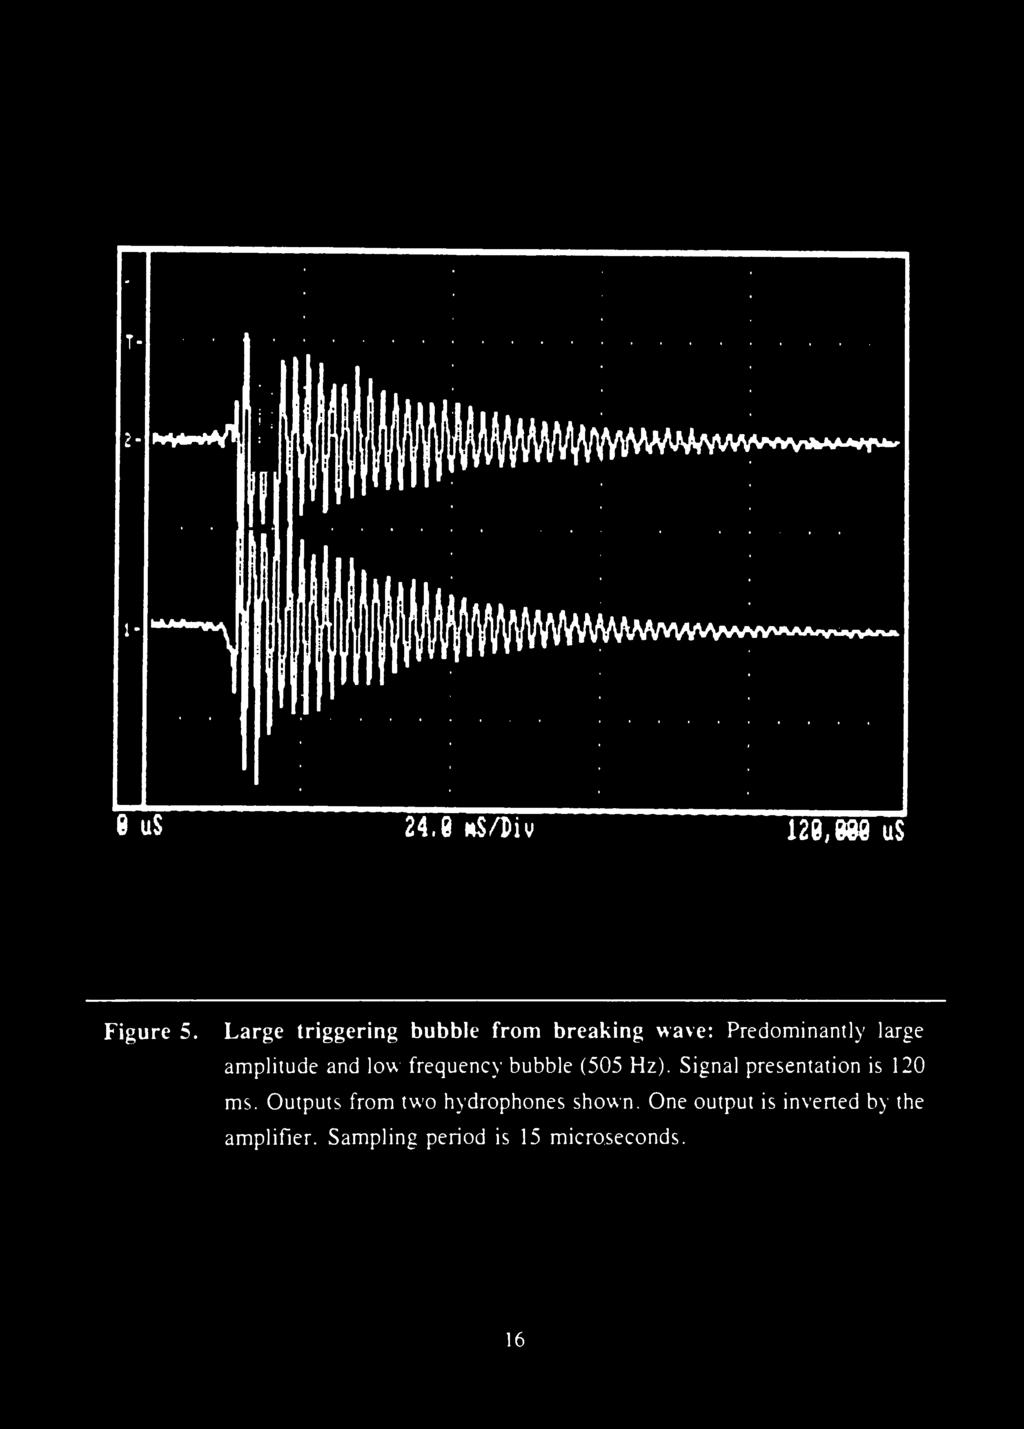 ampltude and low frequency bubble (505 Hz).